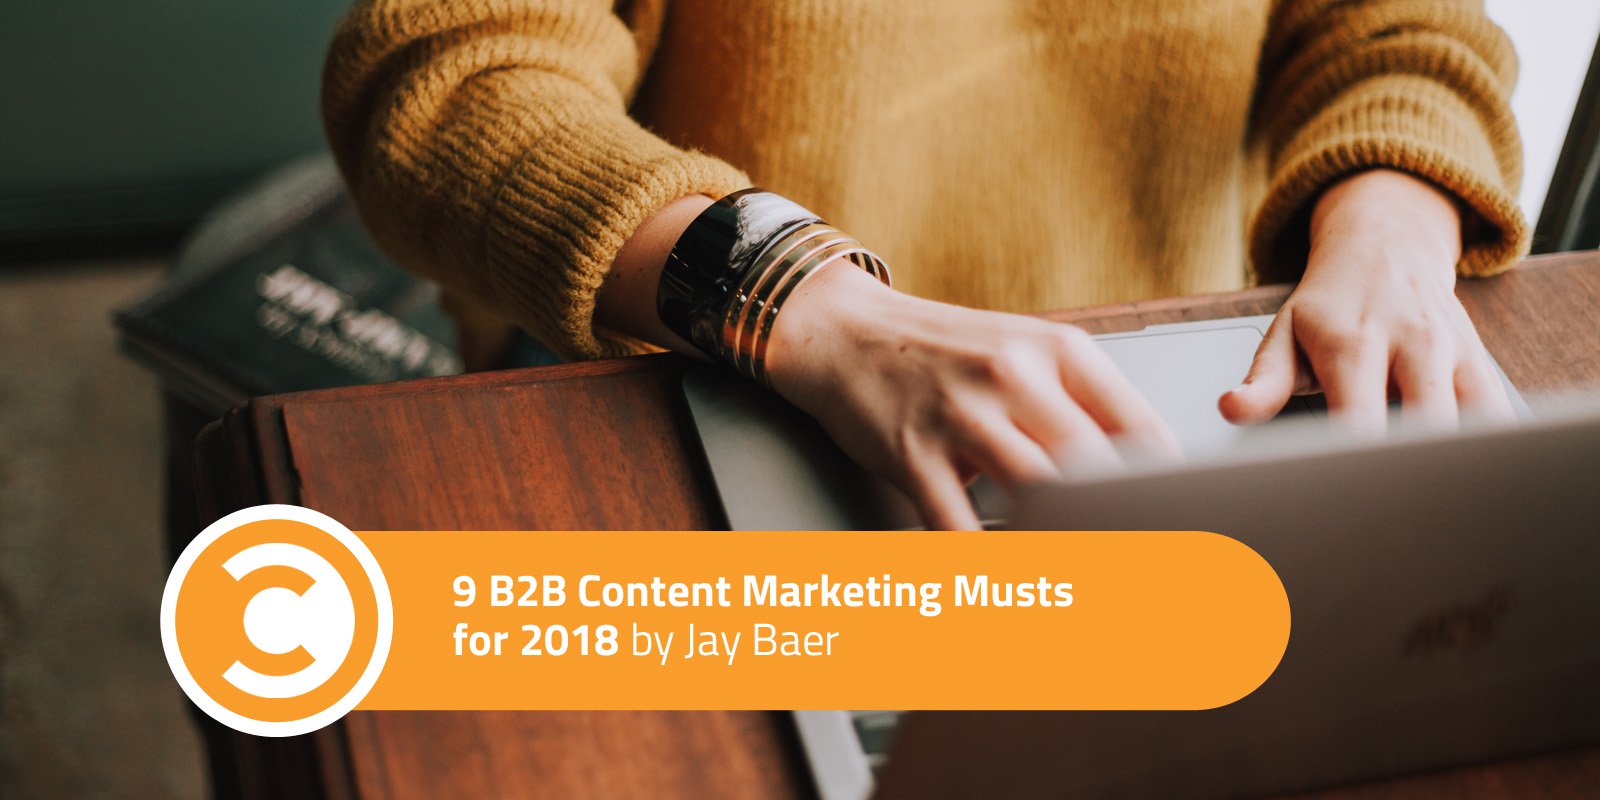 9 B2B Content Marketing Musts for 2018